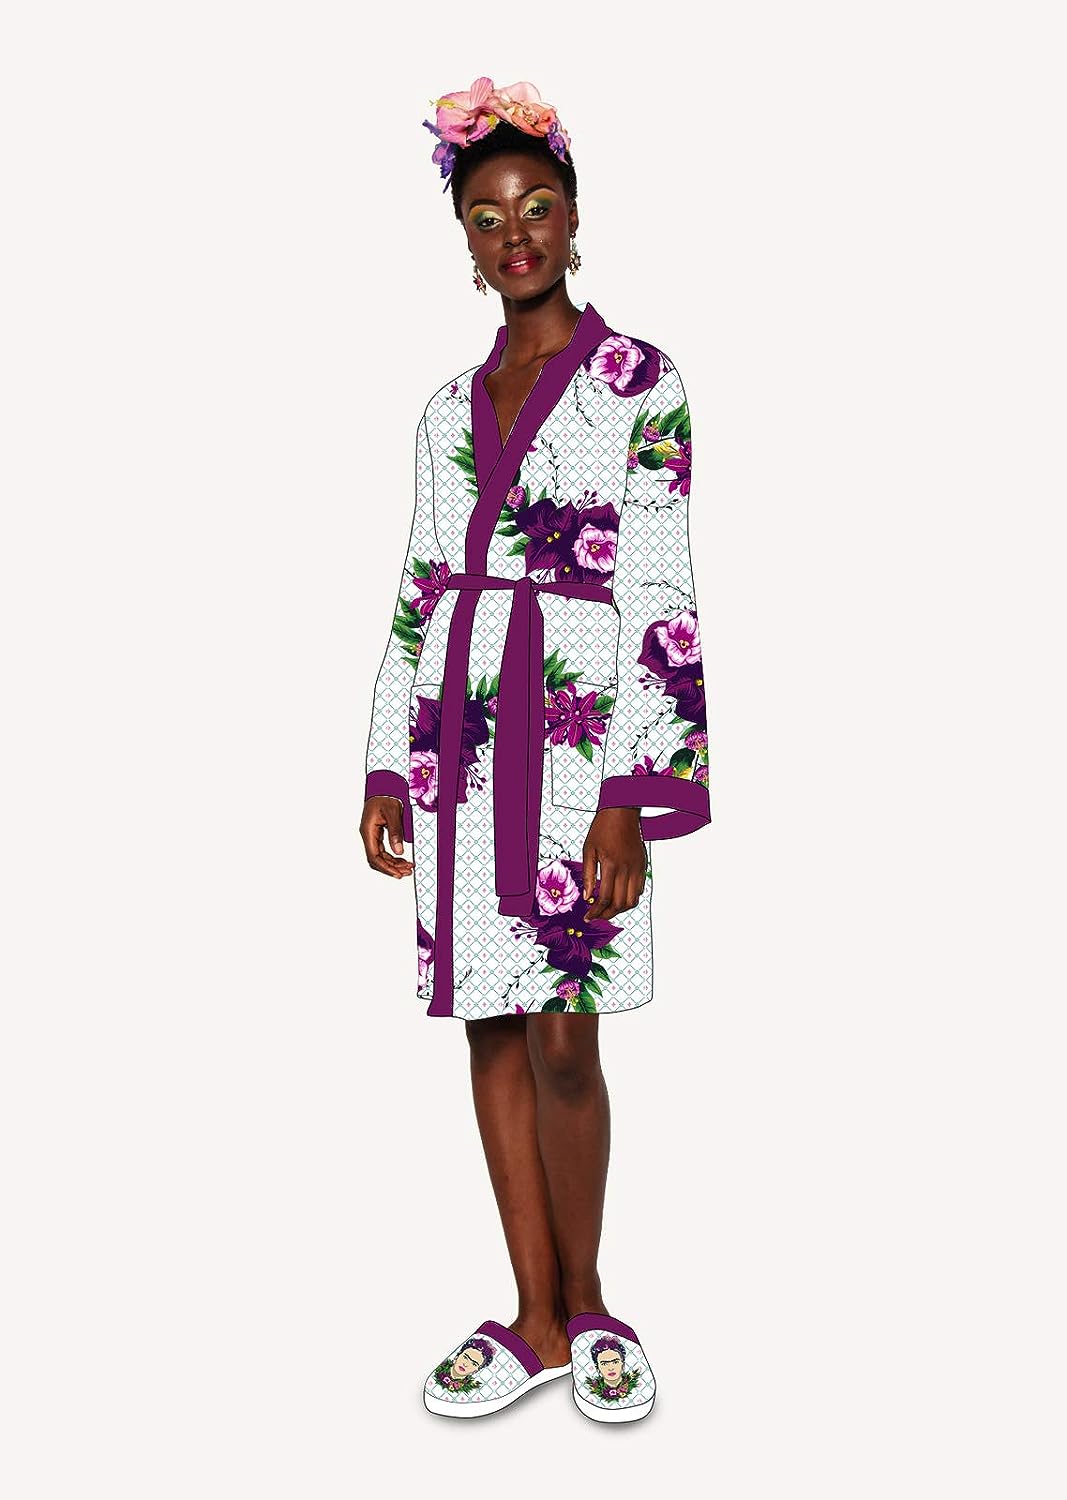 Groovy Frida Kahlo Violet Bouquet Satin Style Ladies Robe One Size RRP £10.39 CLEARANCE XL £7.99